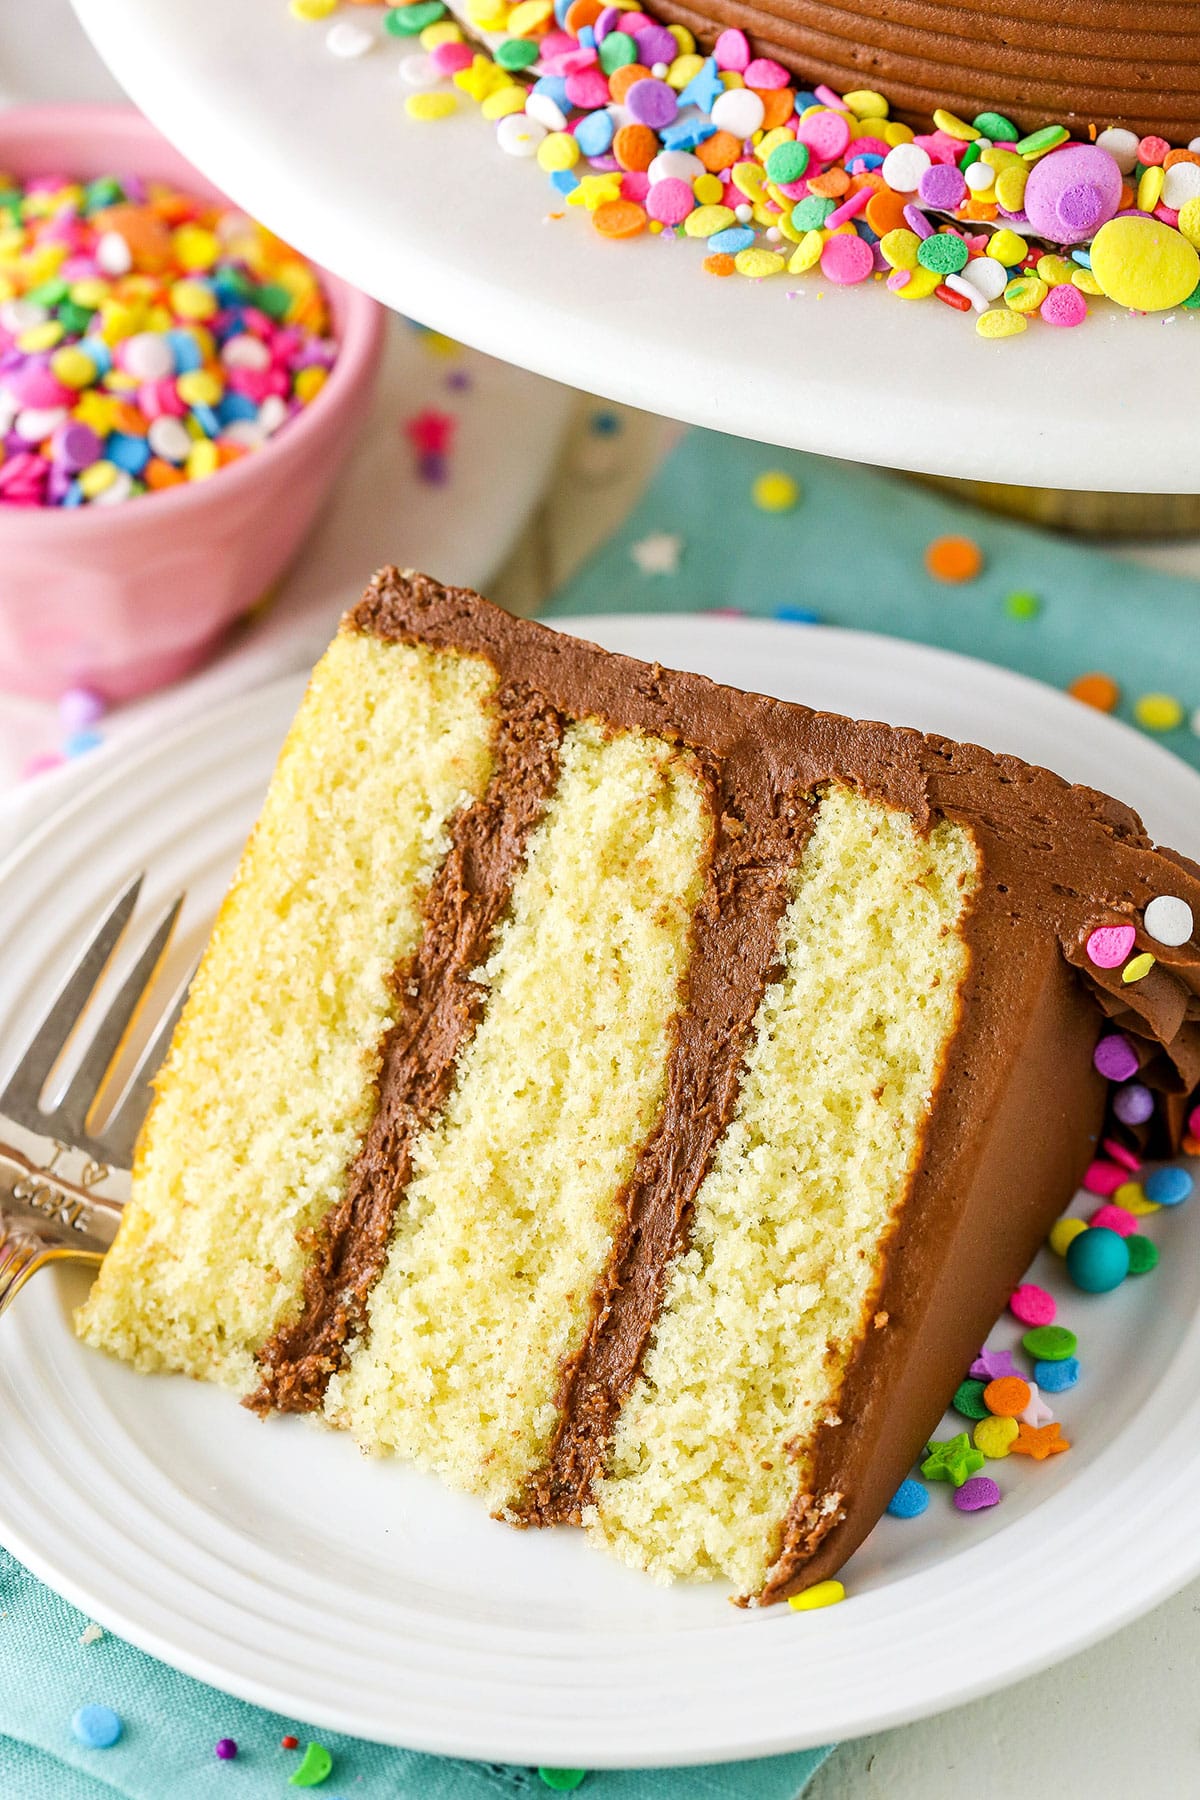 A slice of Yellow Cake with Chocolate Frosting next to a fork on a white plate